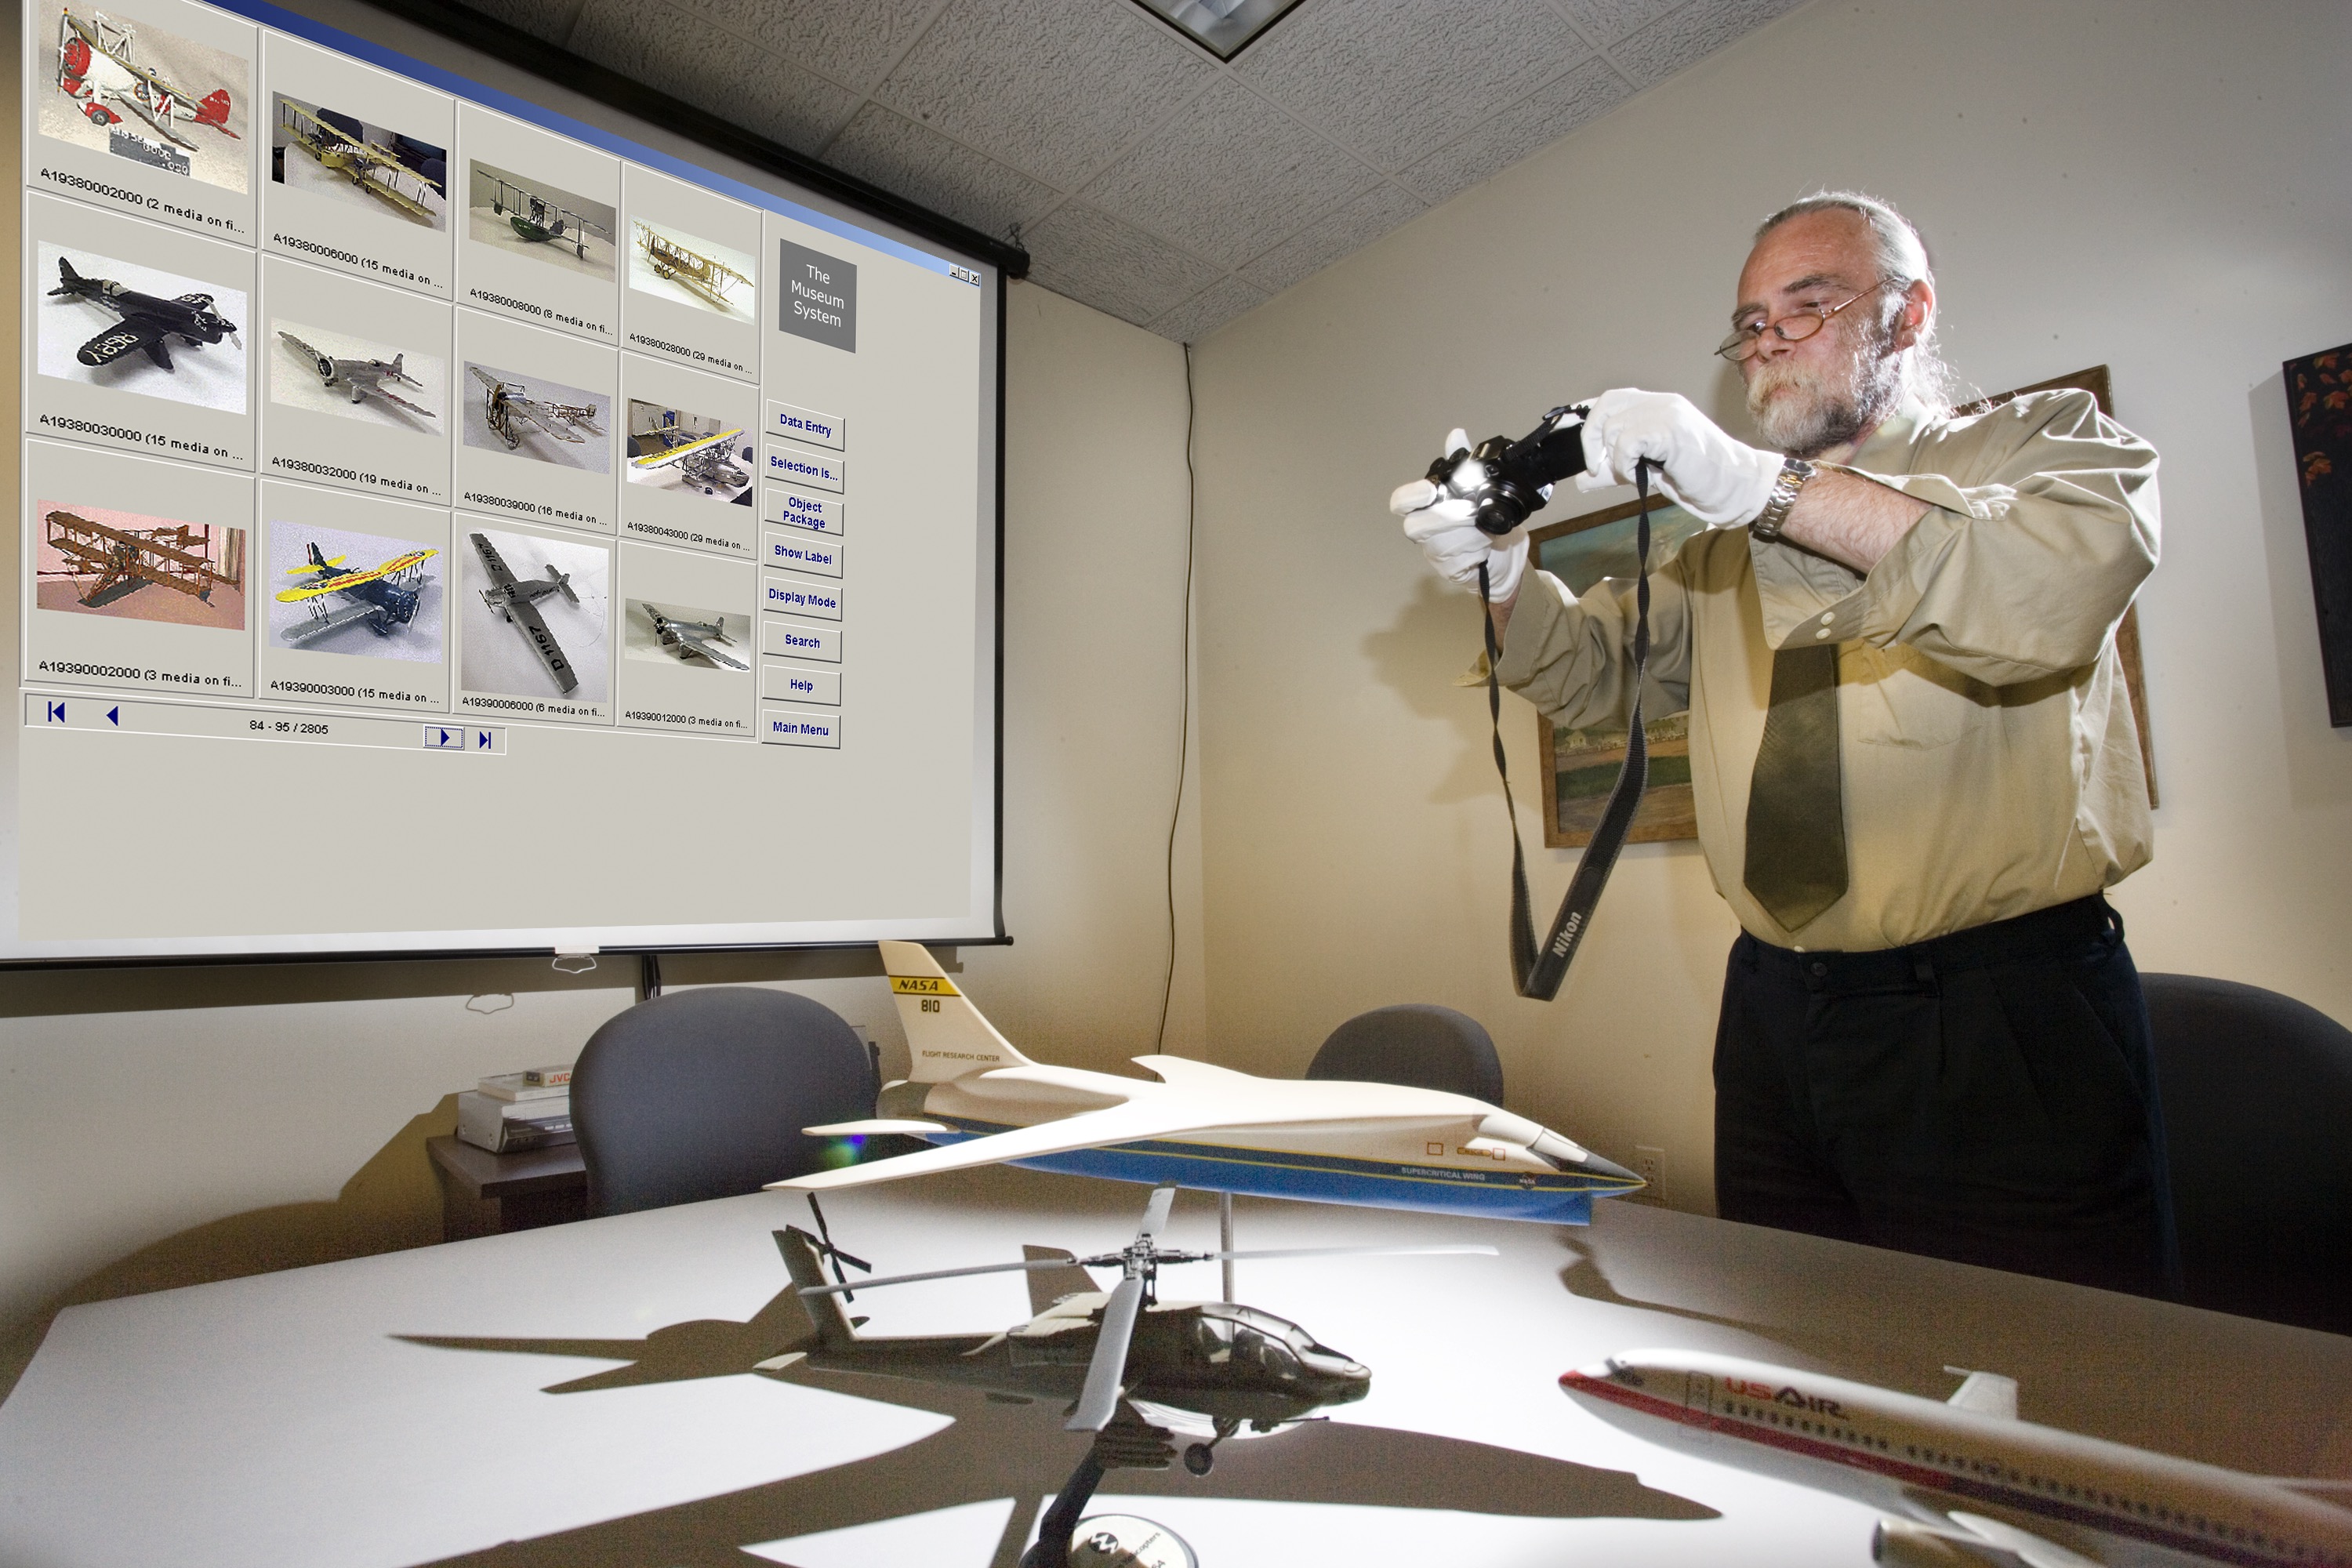 A man stands over a model airplane. He is wearing white gloves and is holding up a camera. 